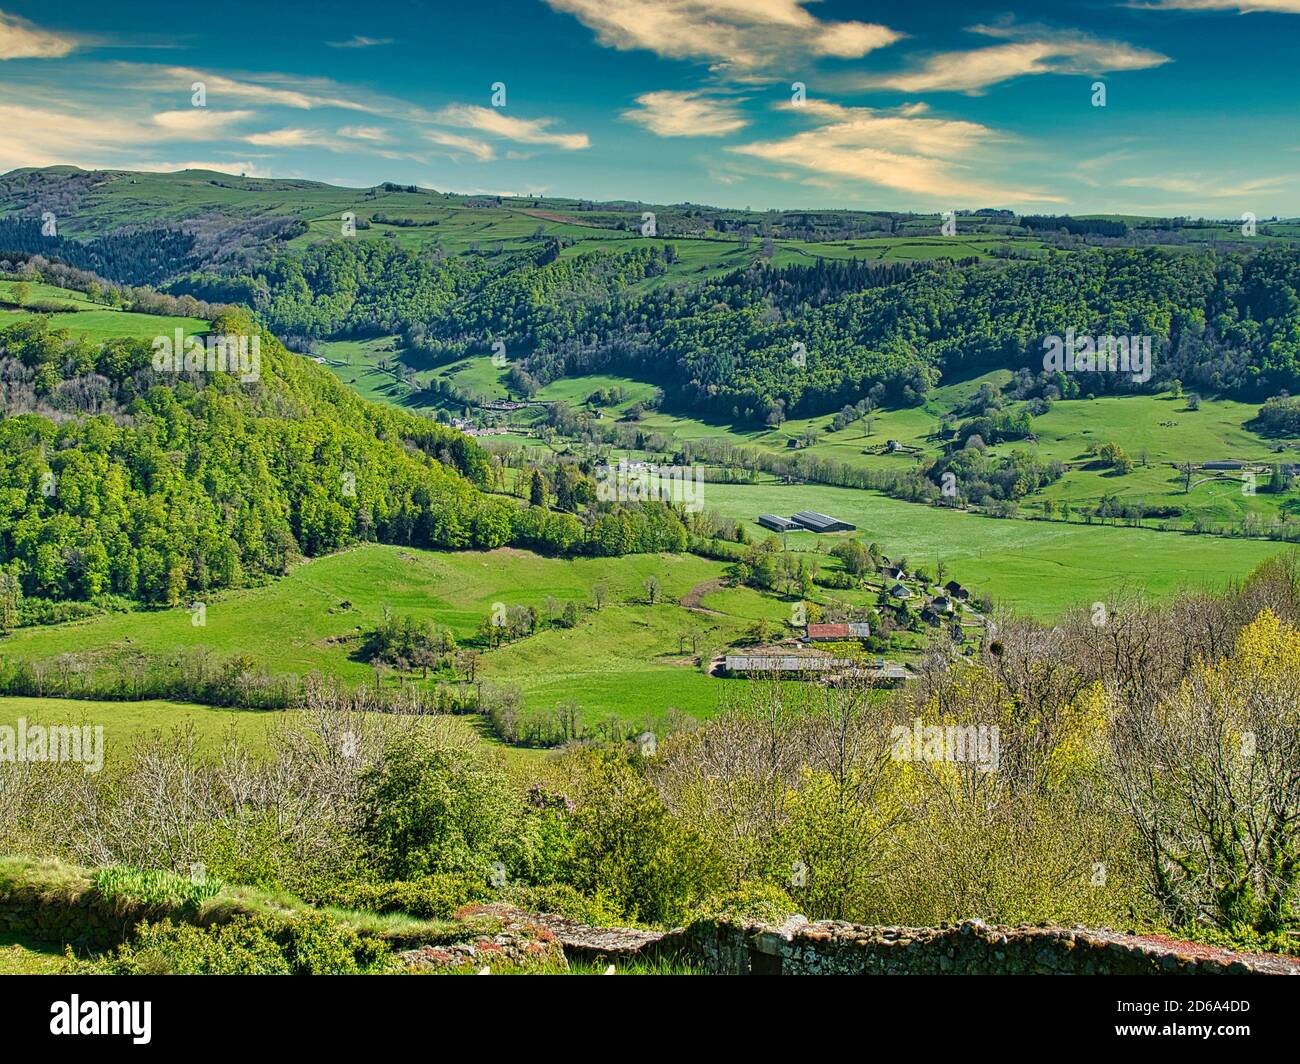 view of Maronne Valley from Salers, Cantal Department, Auvergne region, France. Stock Photo